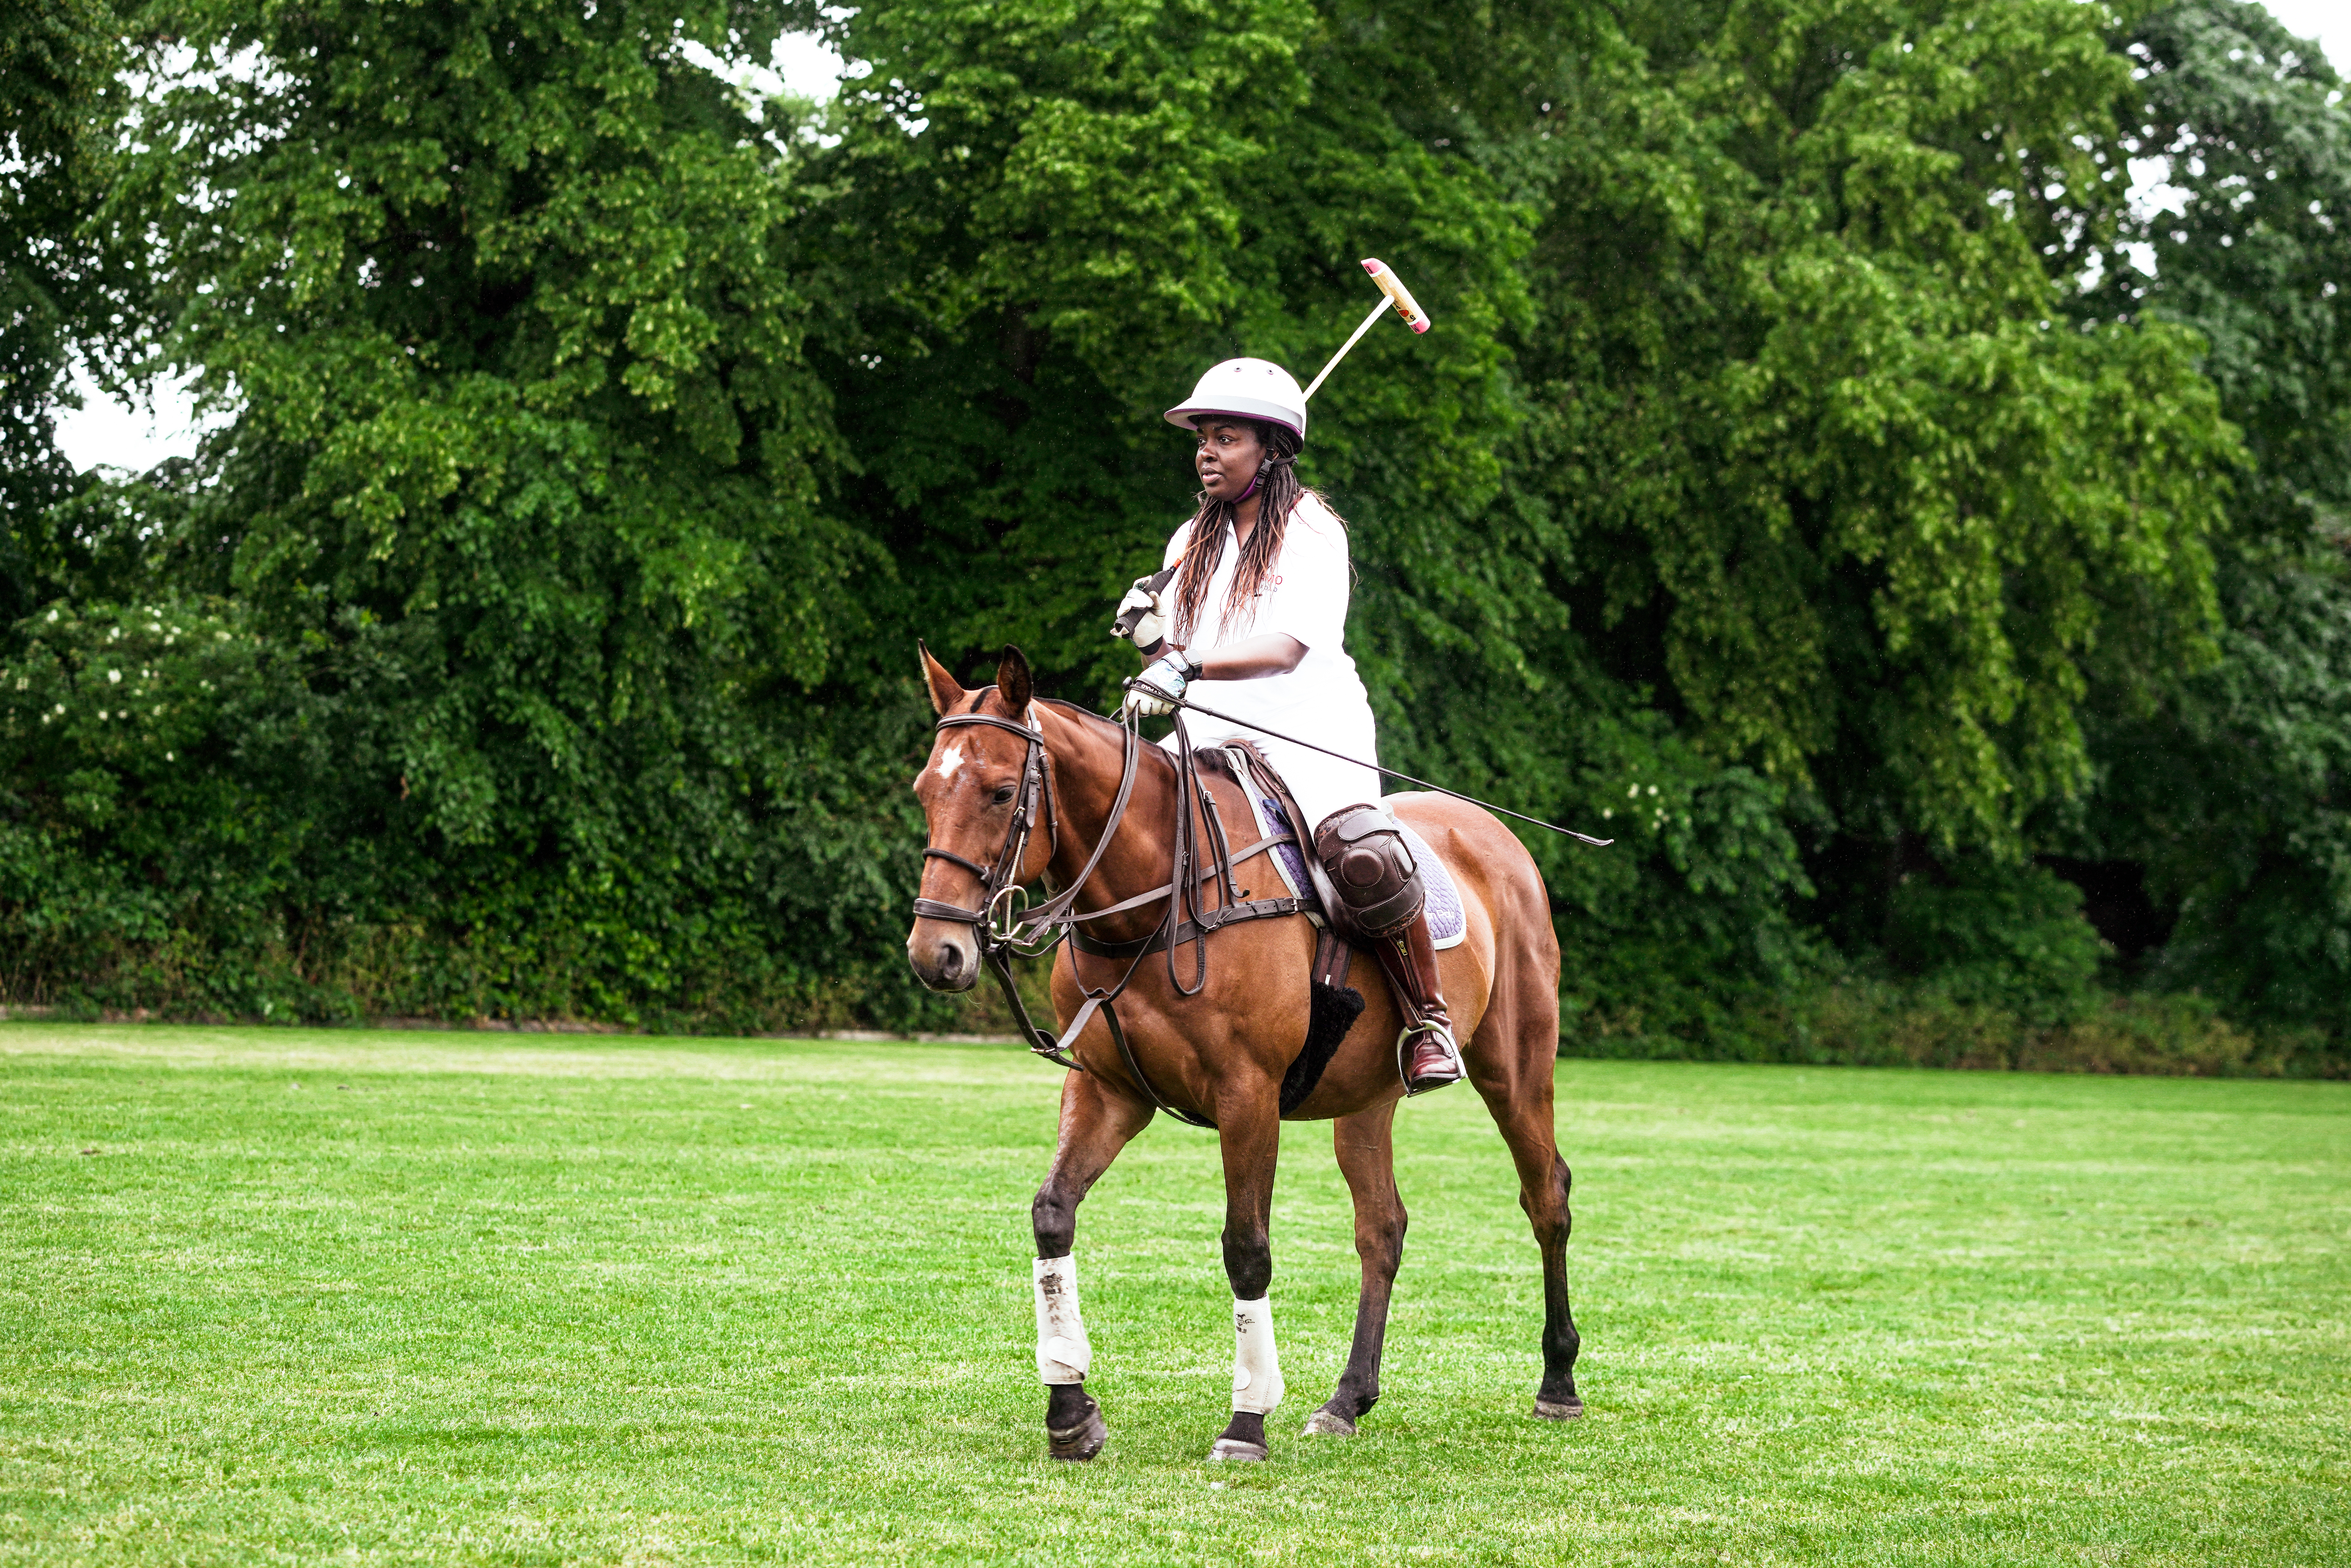 Black female polo equestrian Mame-Yaa Bonsu is sitting on a chestnut coloured horse in polo clothes holding a polo stick trotting on a polo pitch.